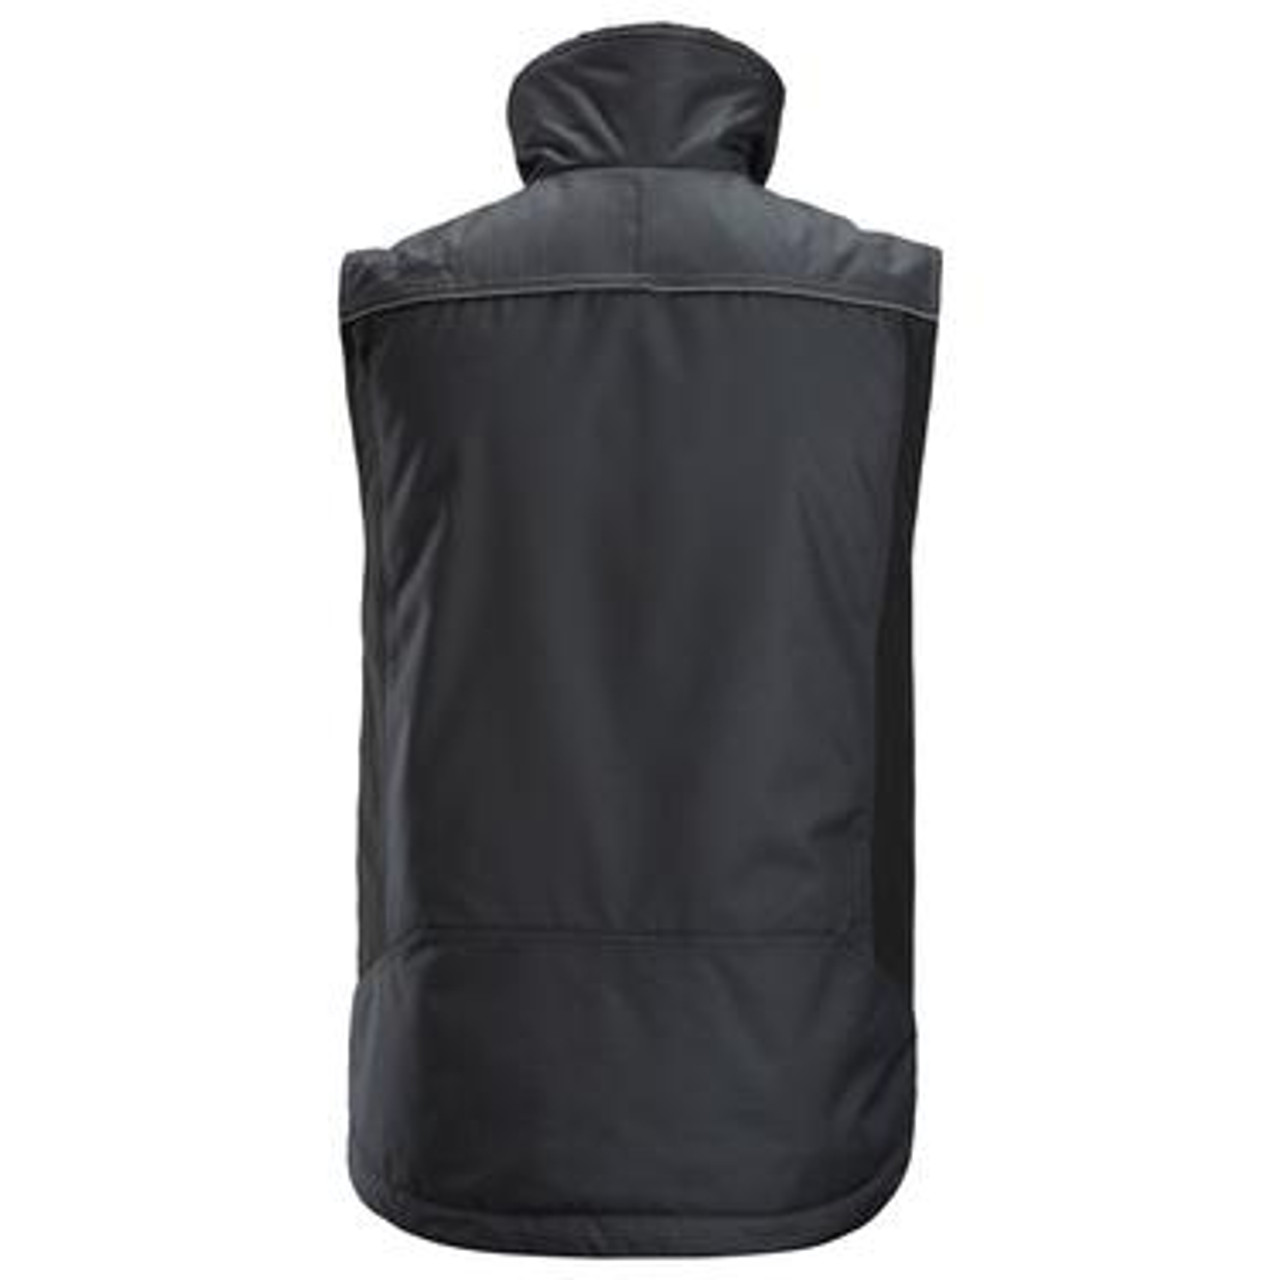 Buy online in Australia and New Zealand a  Mid Grey Vest  for Carpenters that are comfortable and durable.